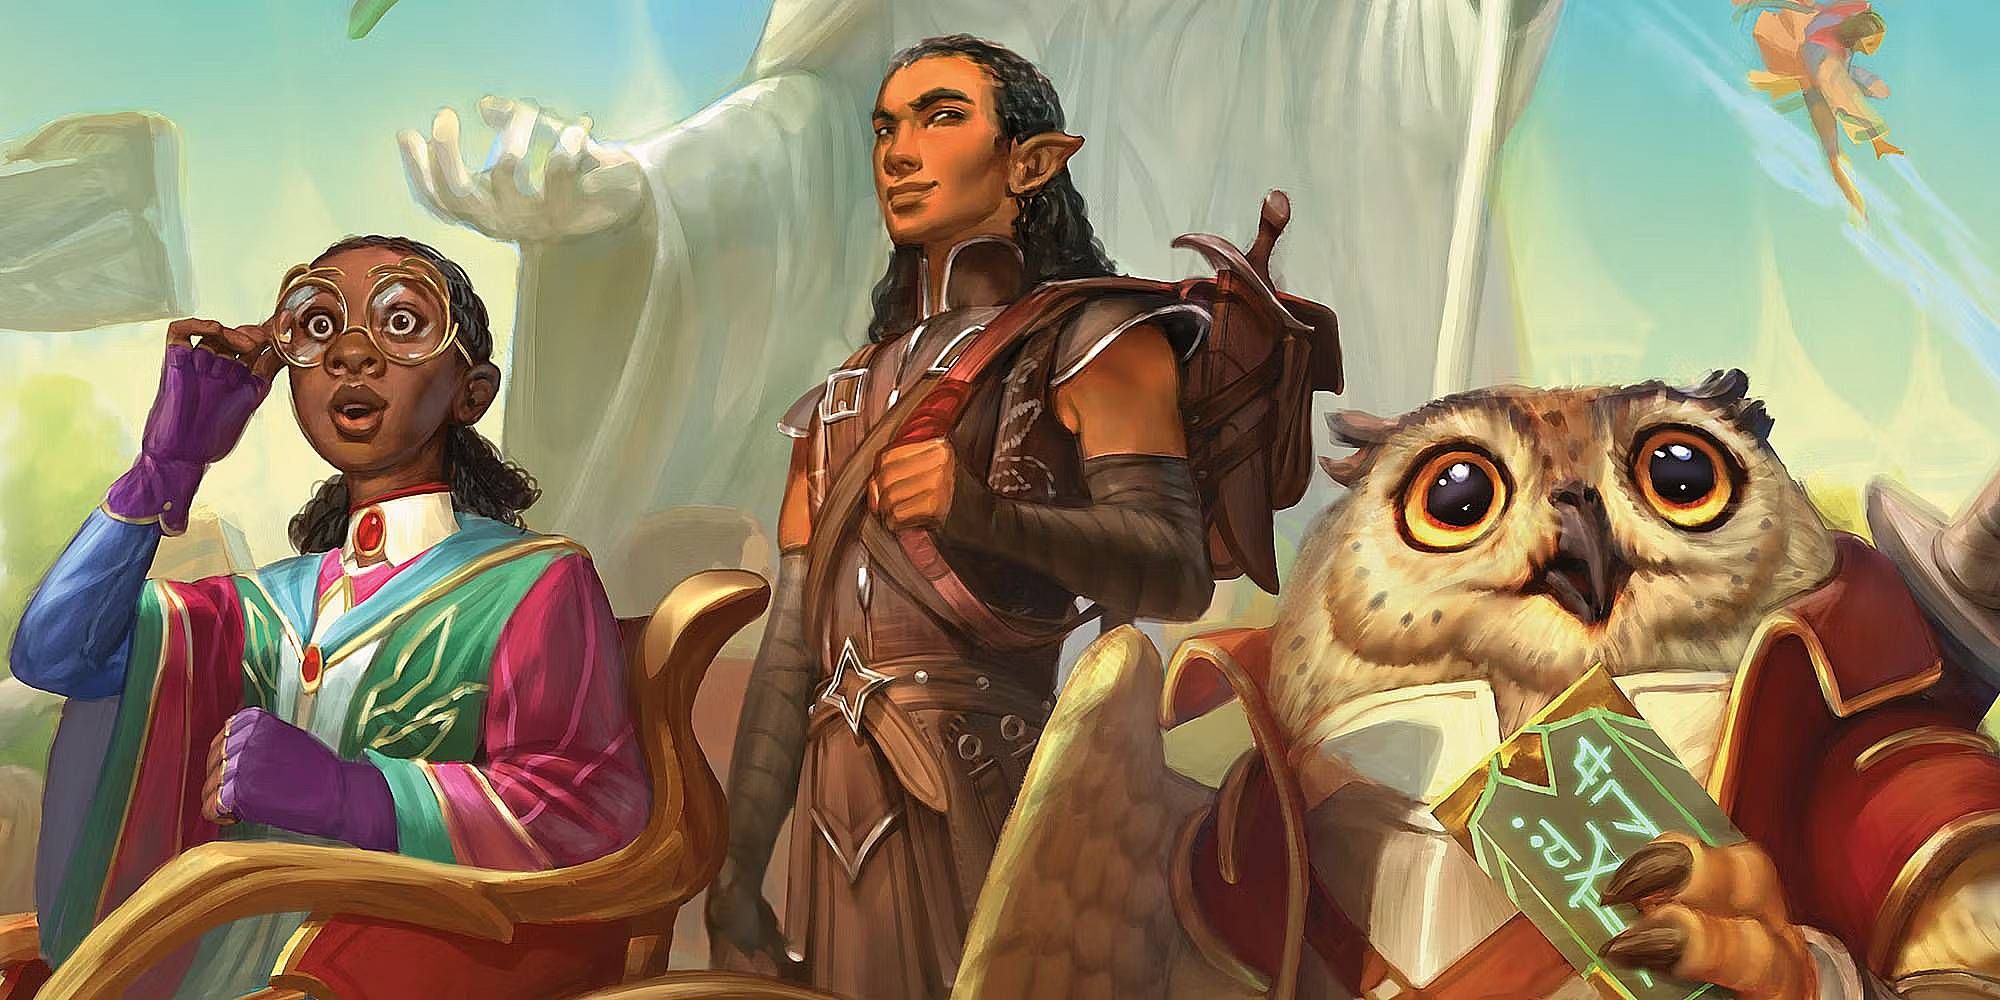 A dark-skinned woman, a tanned half-elf, and an owl looking around 